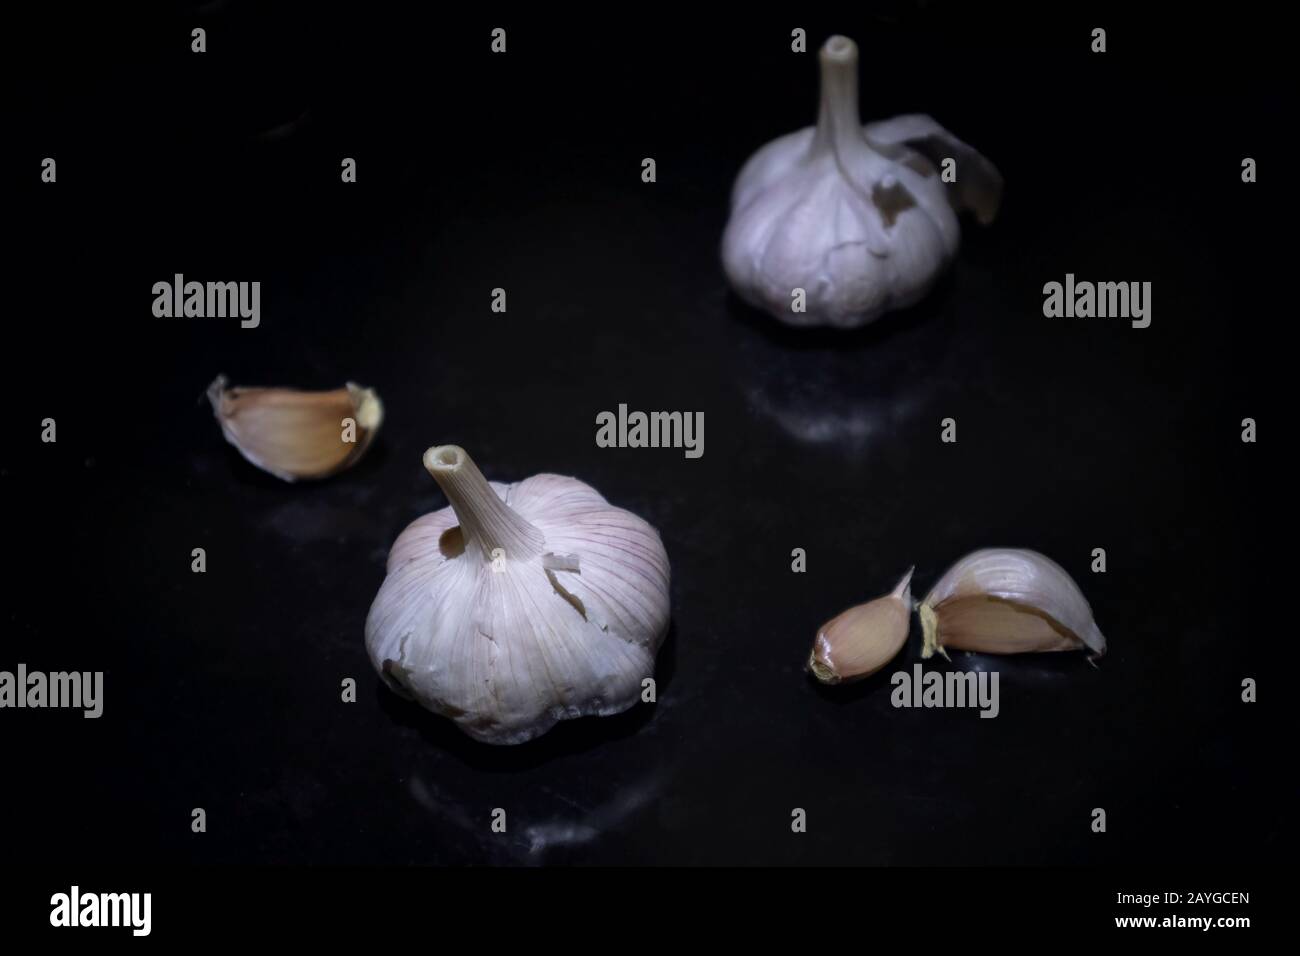 Garlic close-up product show on black background. Spice garlic clove vitamin food winter health eating Stock Photo